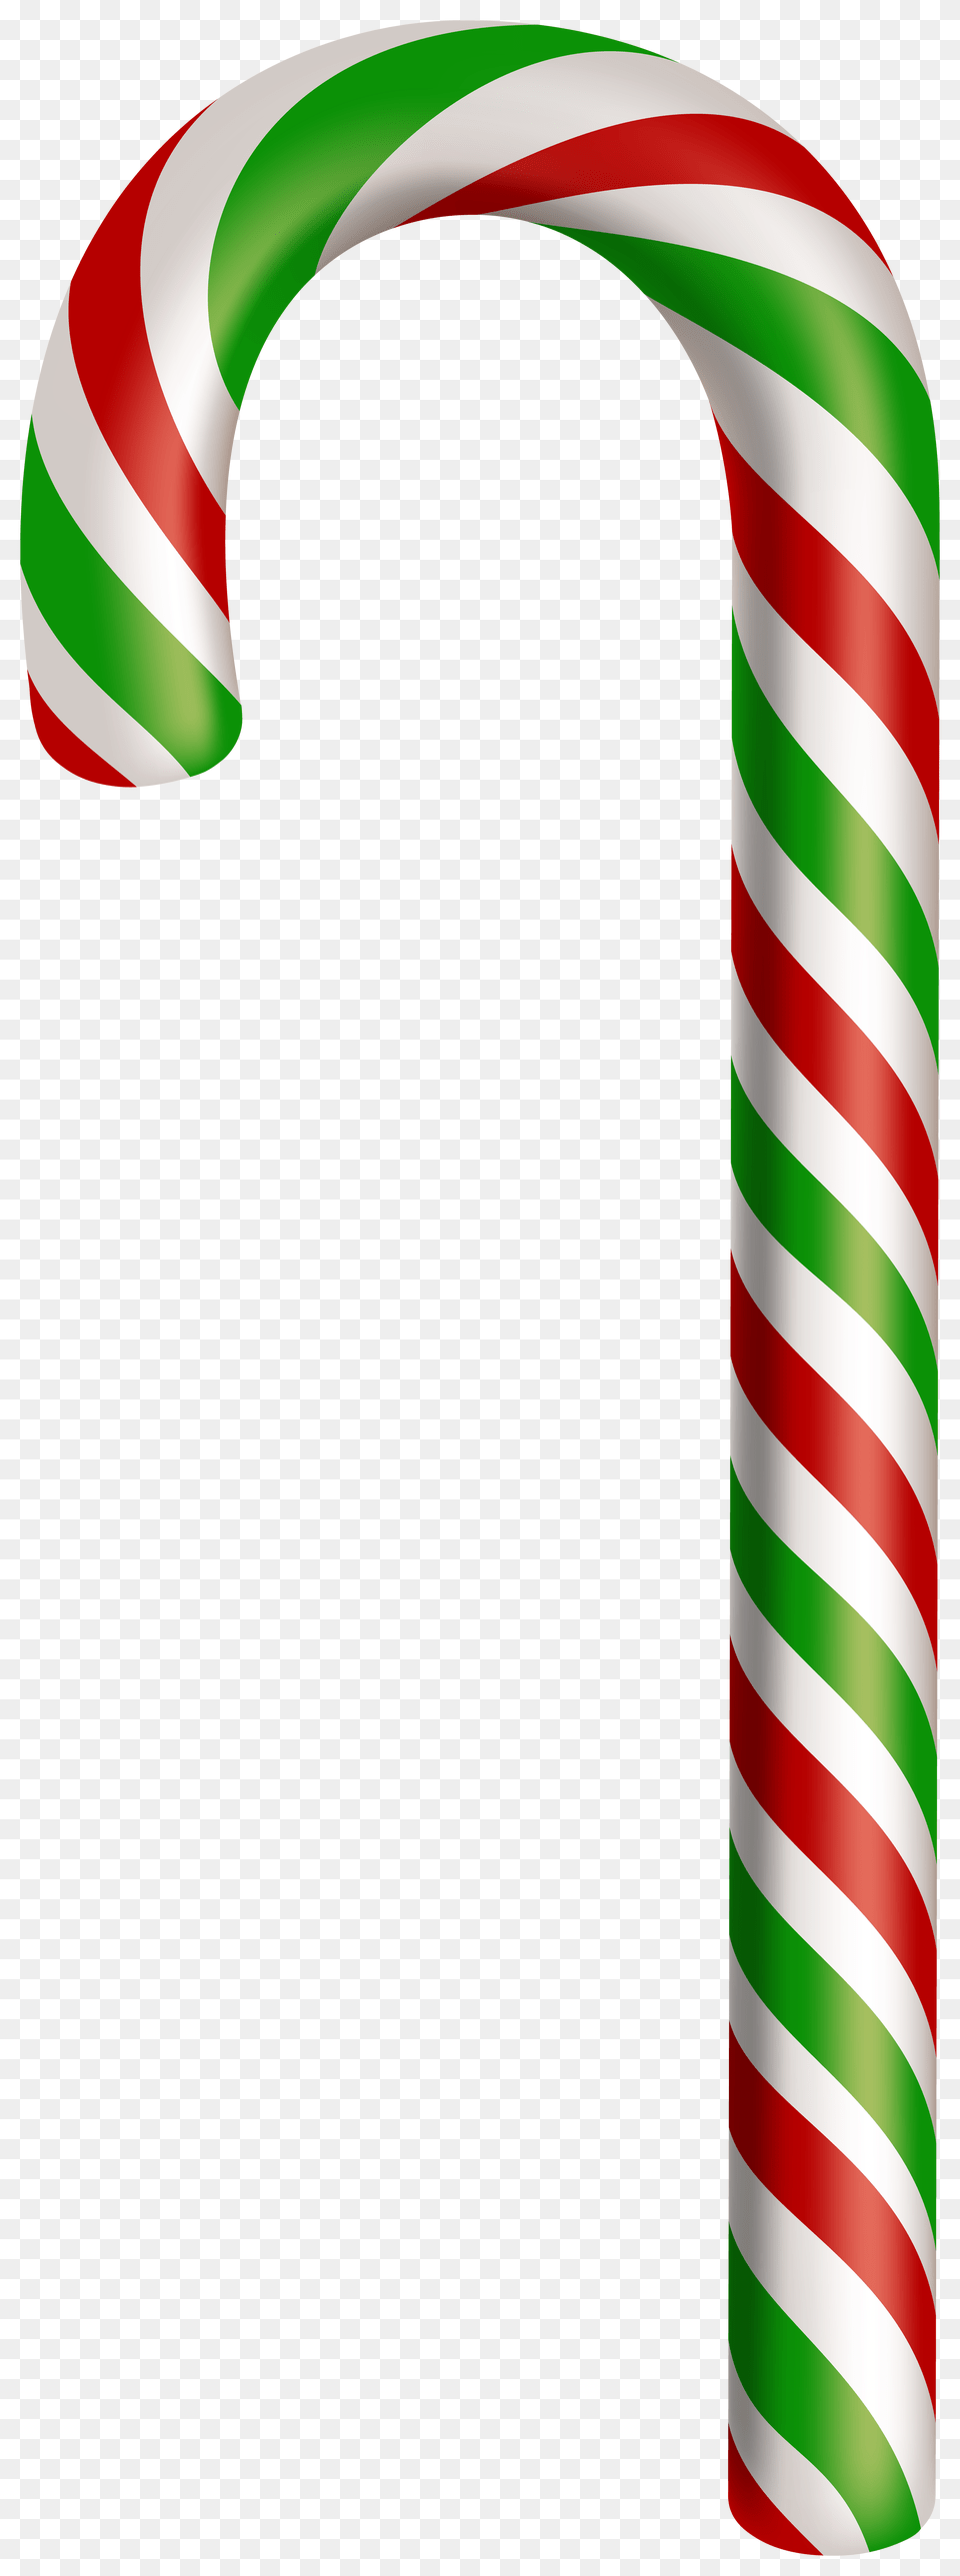 Christmas Candy Cane Clip Art, Food, Sweets, Dynamite, Weapon Png